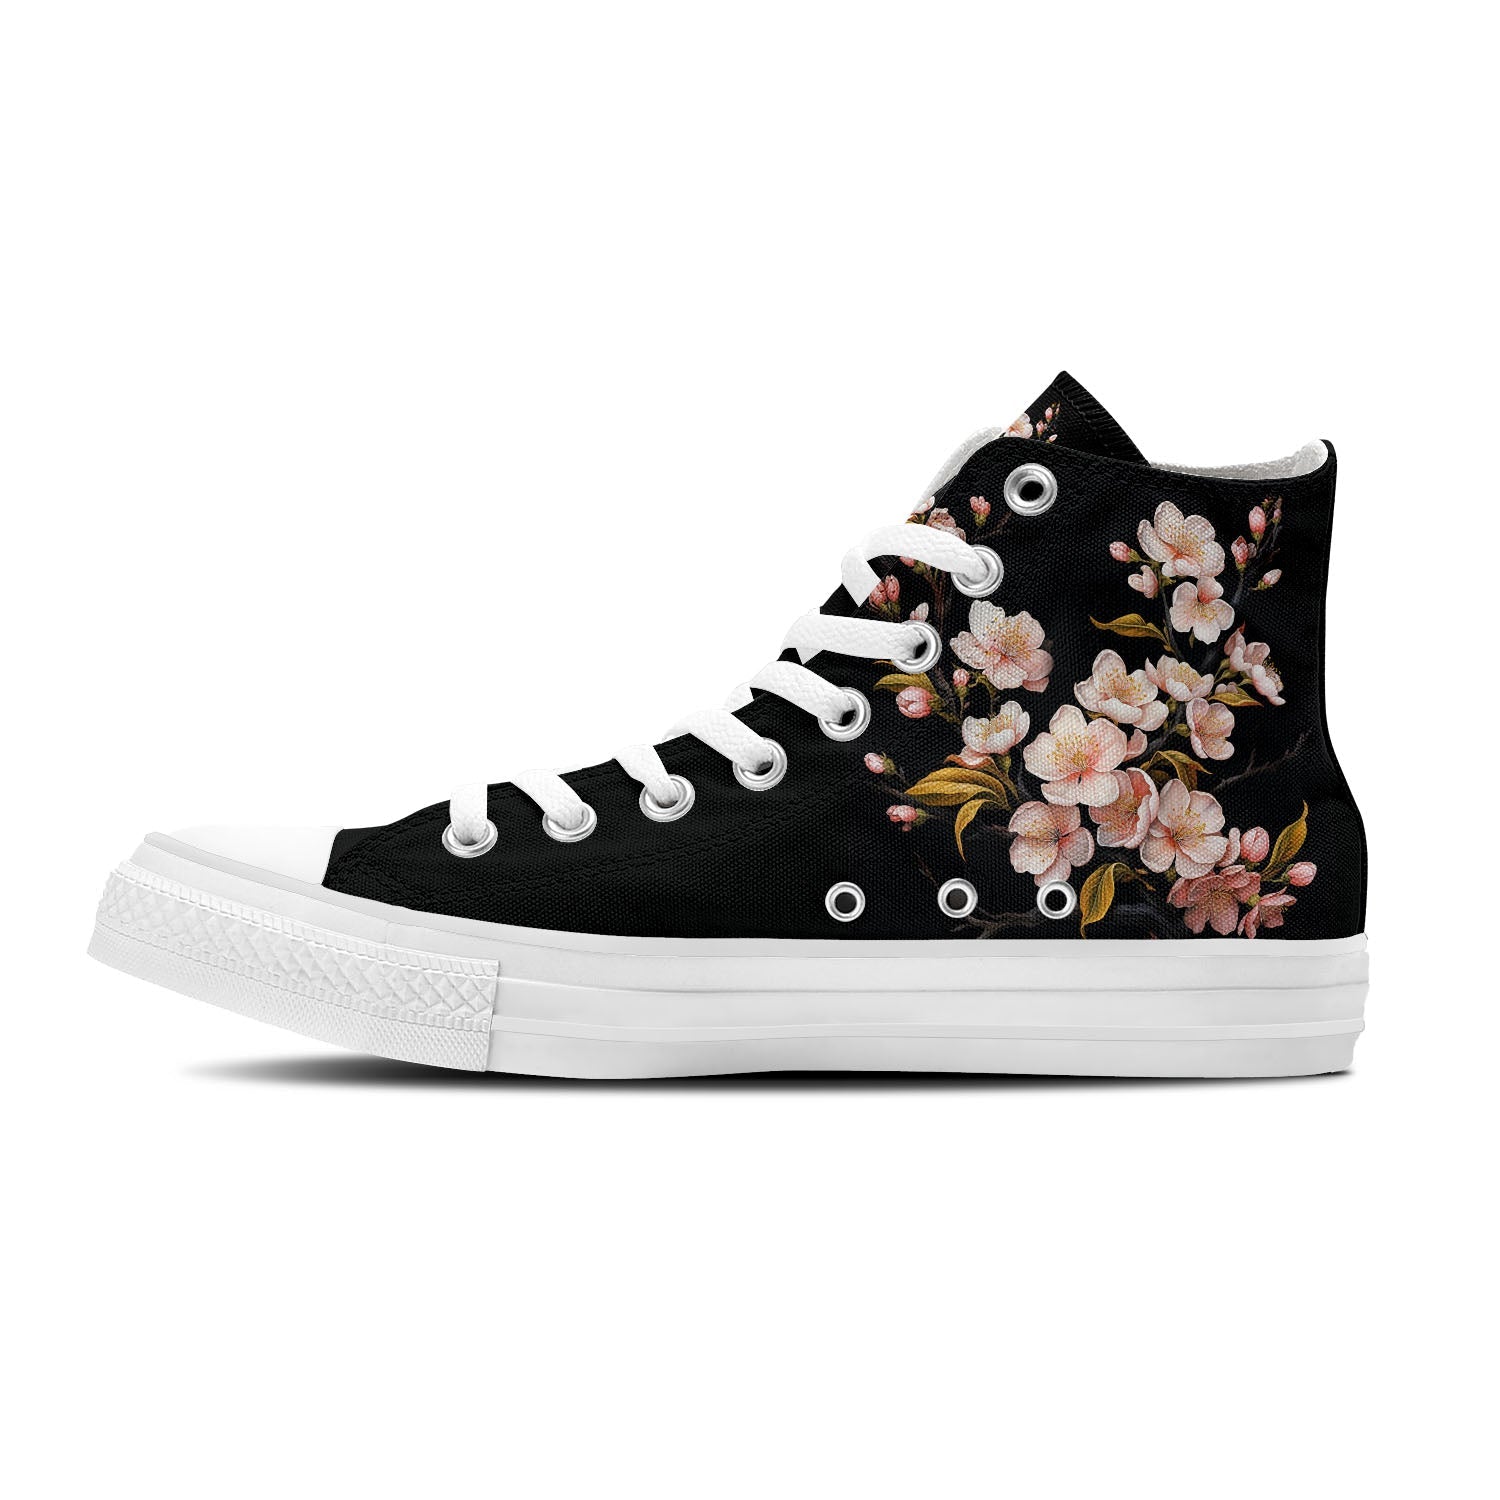 Petals in Motion: Elevate Your Style with Central-High Canvas Shoes - Unisex Floral Fashion, Blooming with Plum Blossom Elegance